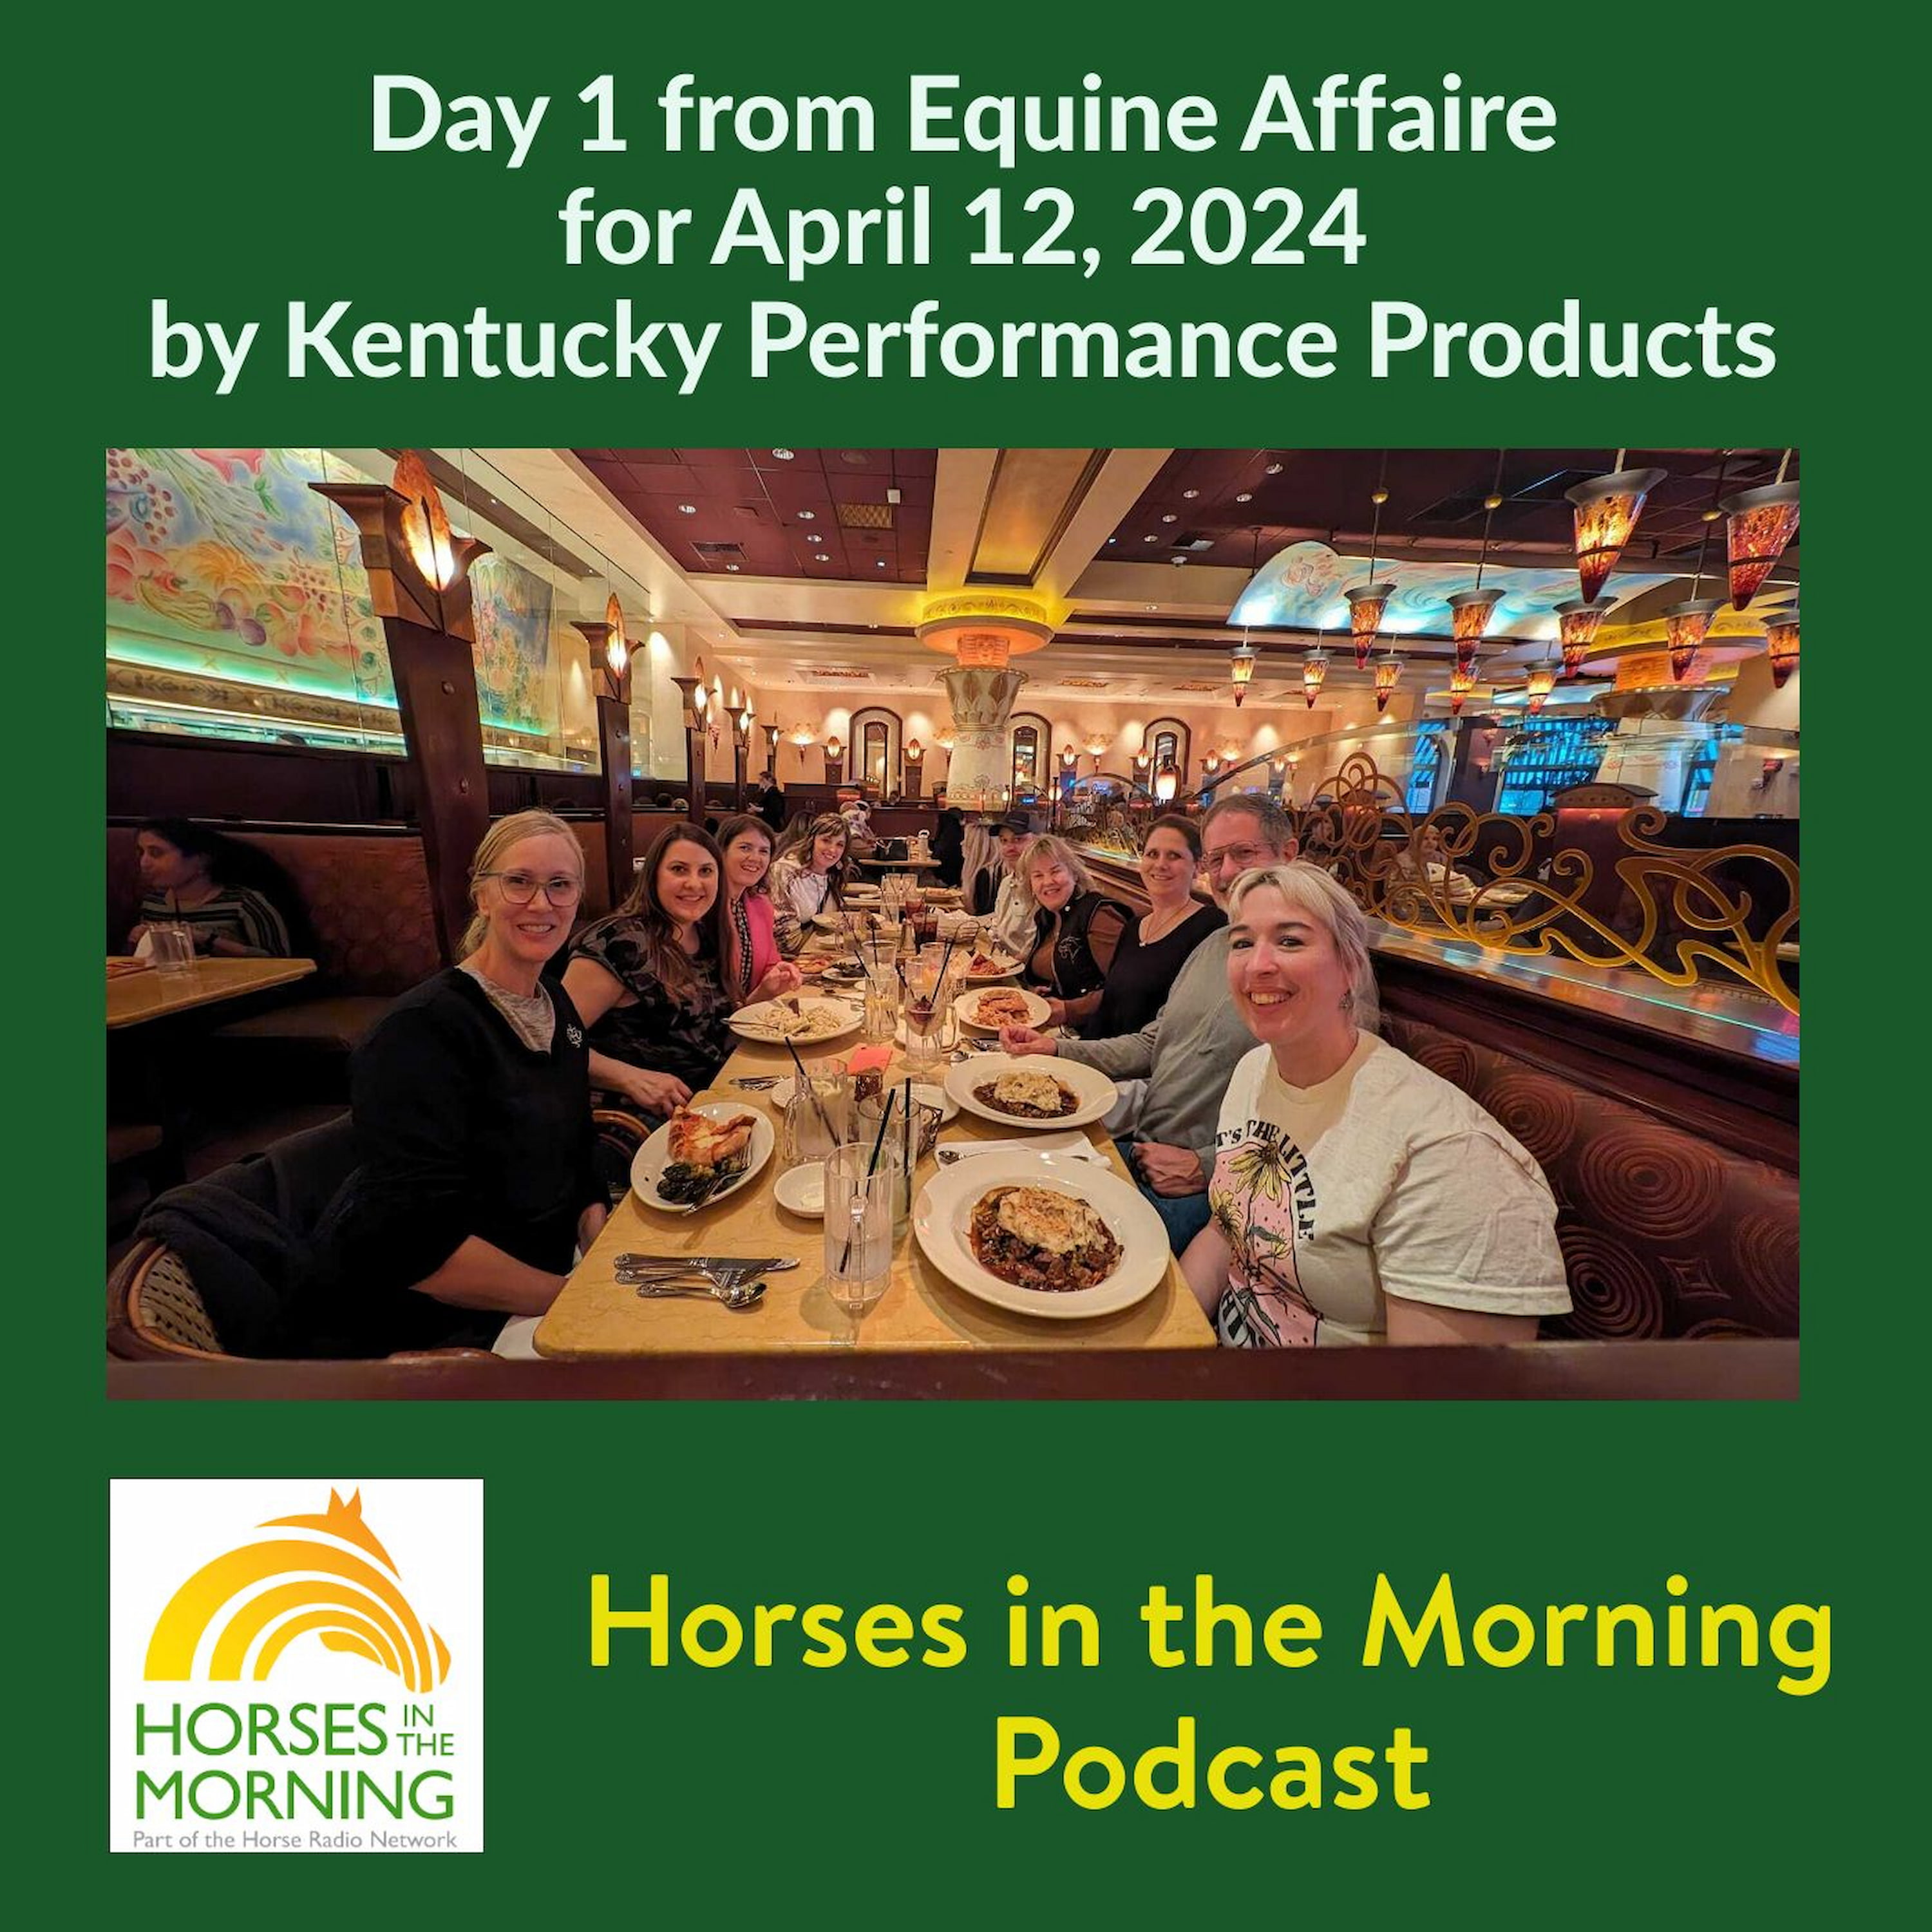 Day 1 from Equine Affaire for April 12, 2024 by Kentucky Performance Products - HORSES IN THE MORNING